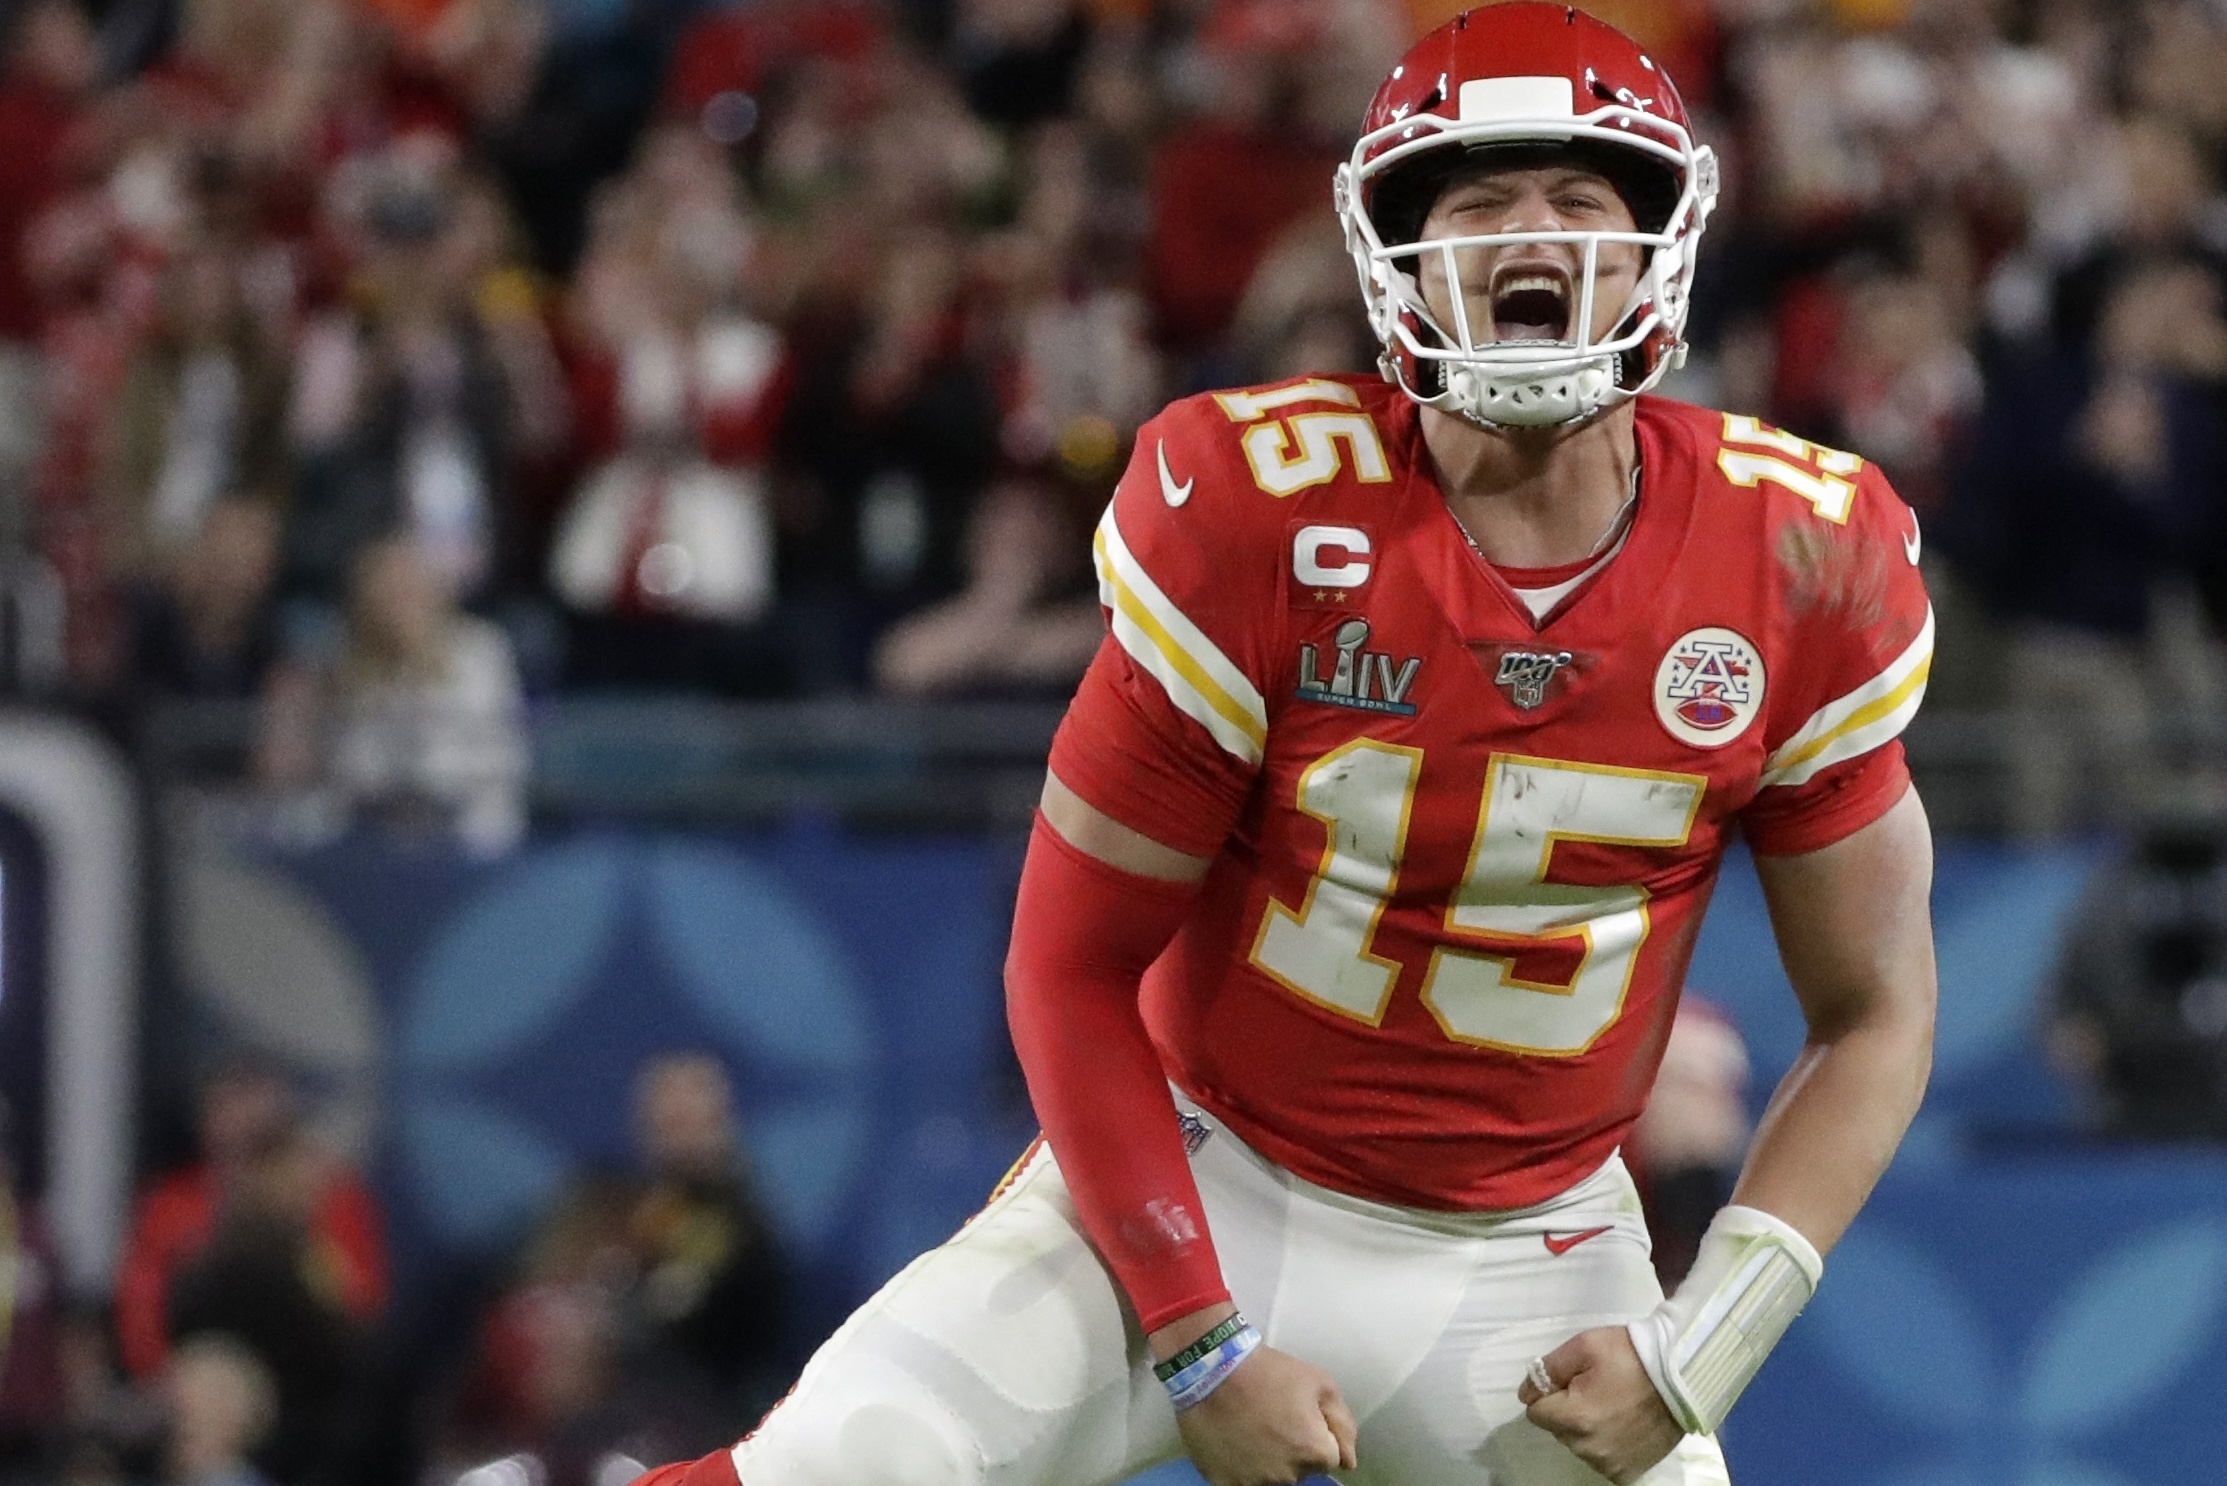 Patrick Mahomes' Game-Worn Jersey and Cleats Sell for $140K at